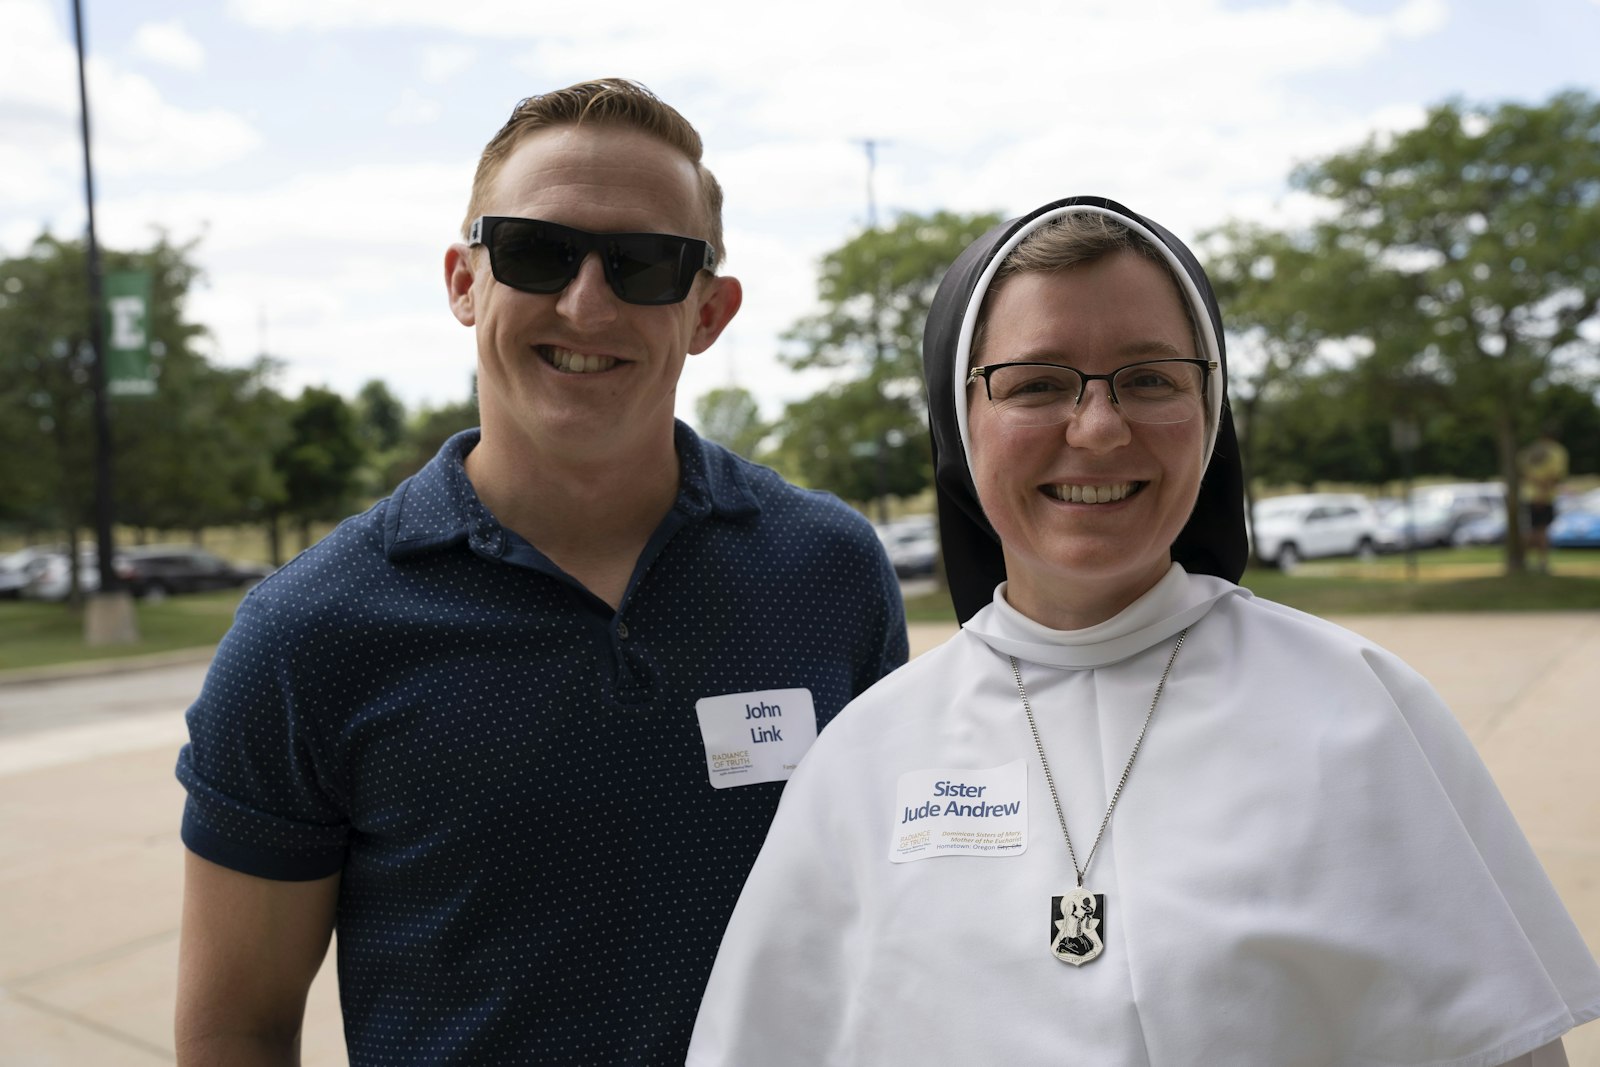 Sr. Jude Andrew, OP, is pictured with his brother, John Link.  He was one of many family members of the sisters to attend the event.